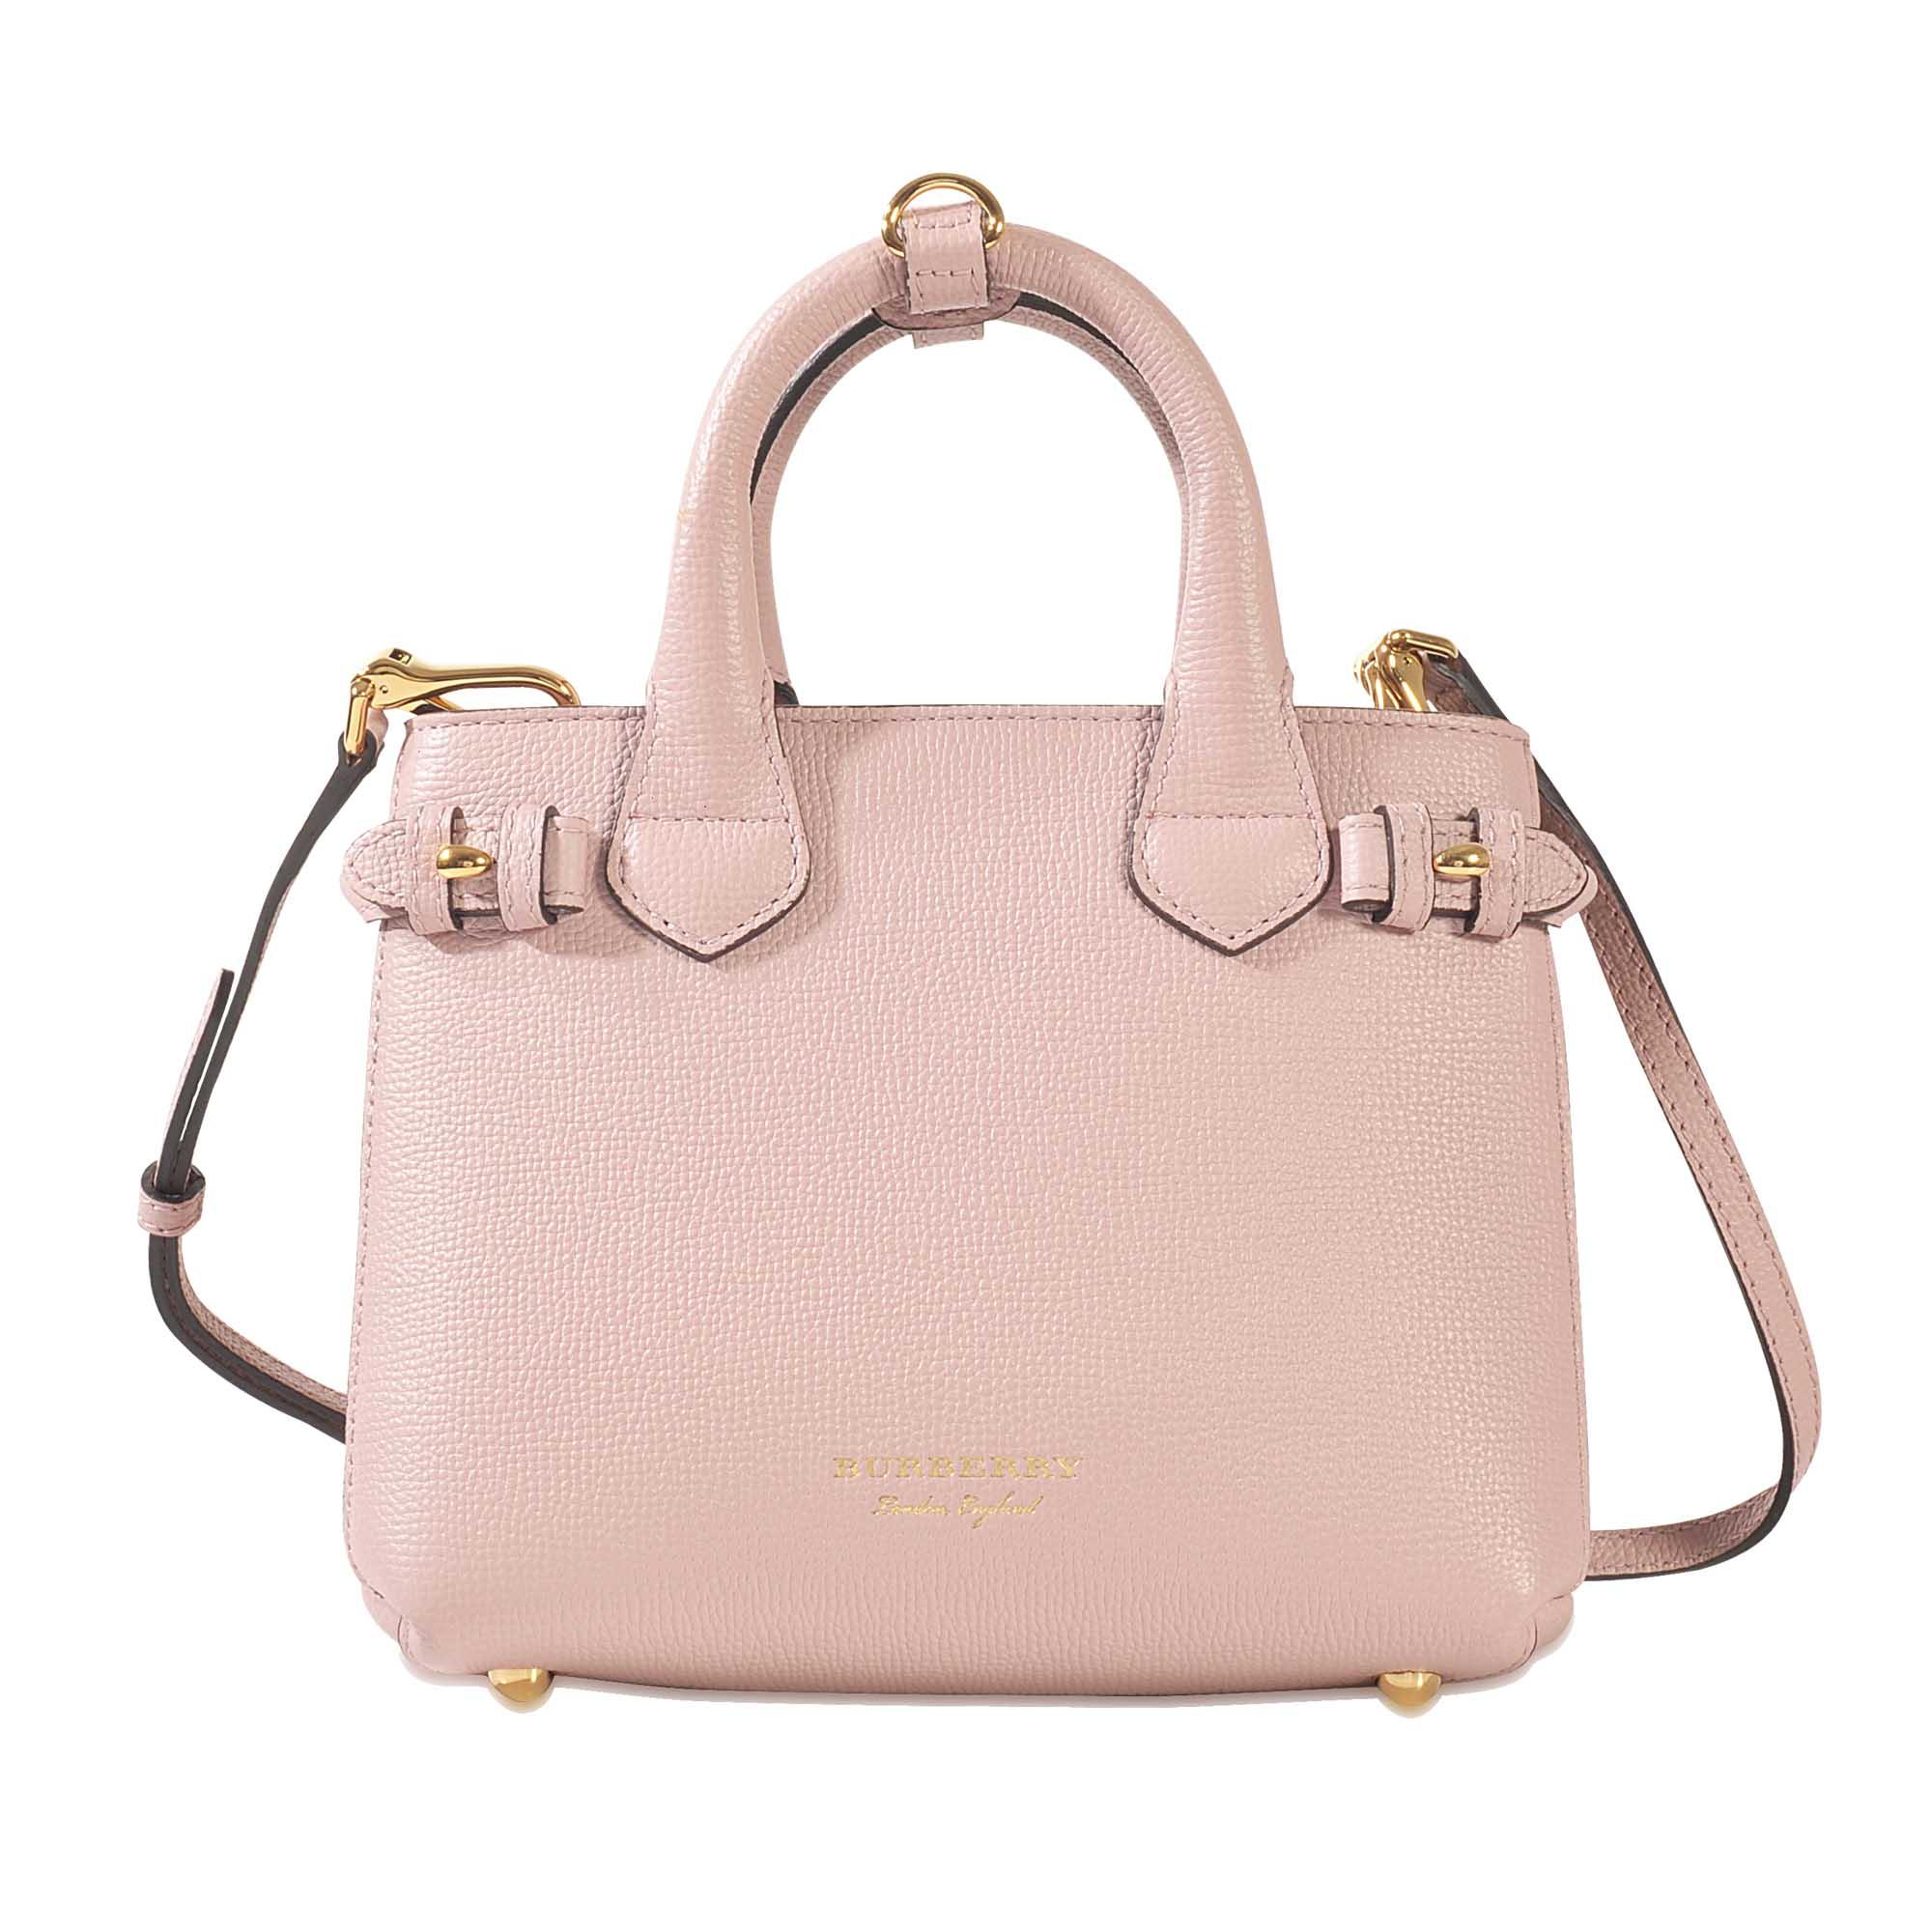 Burberry Leather Baby Banner Bag in Pink - Lyst